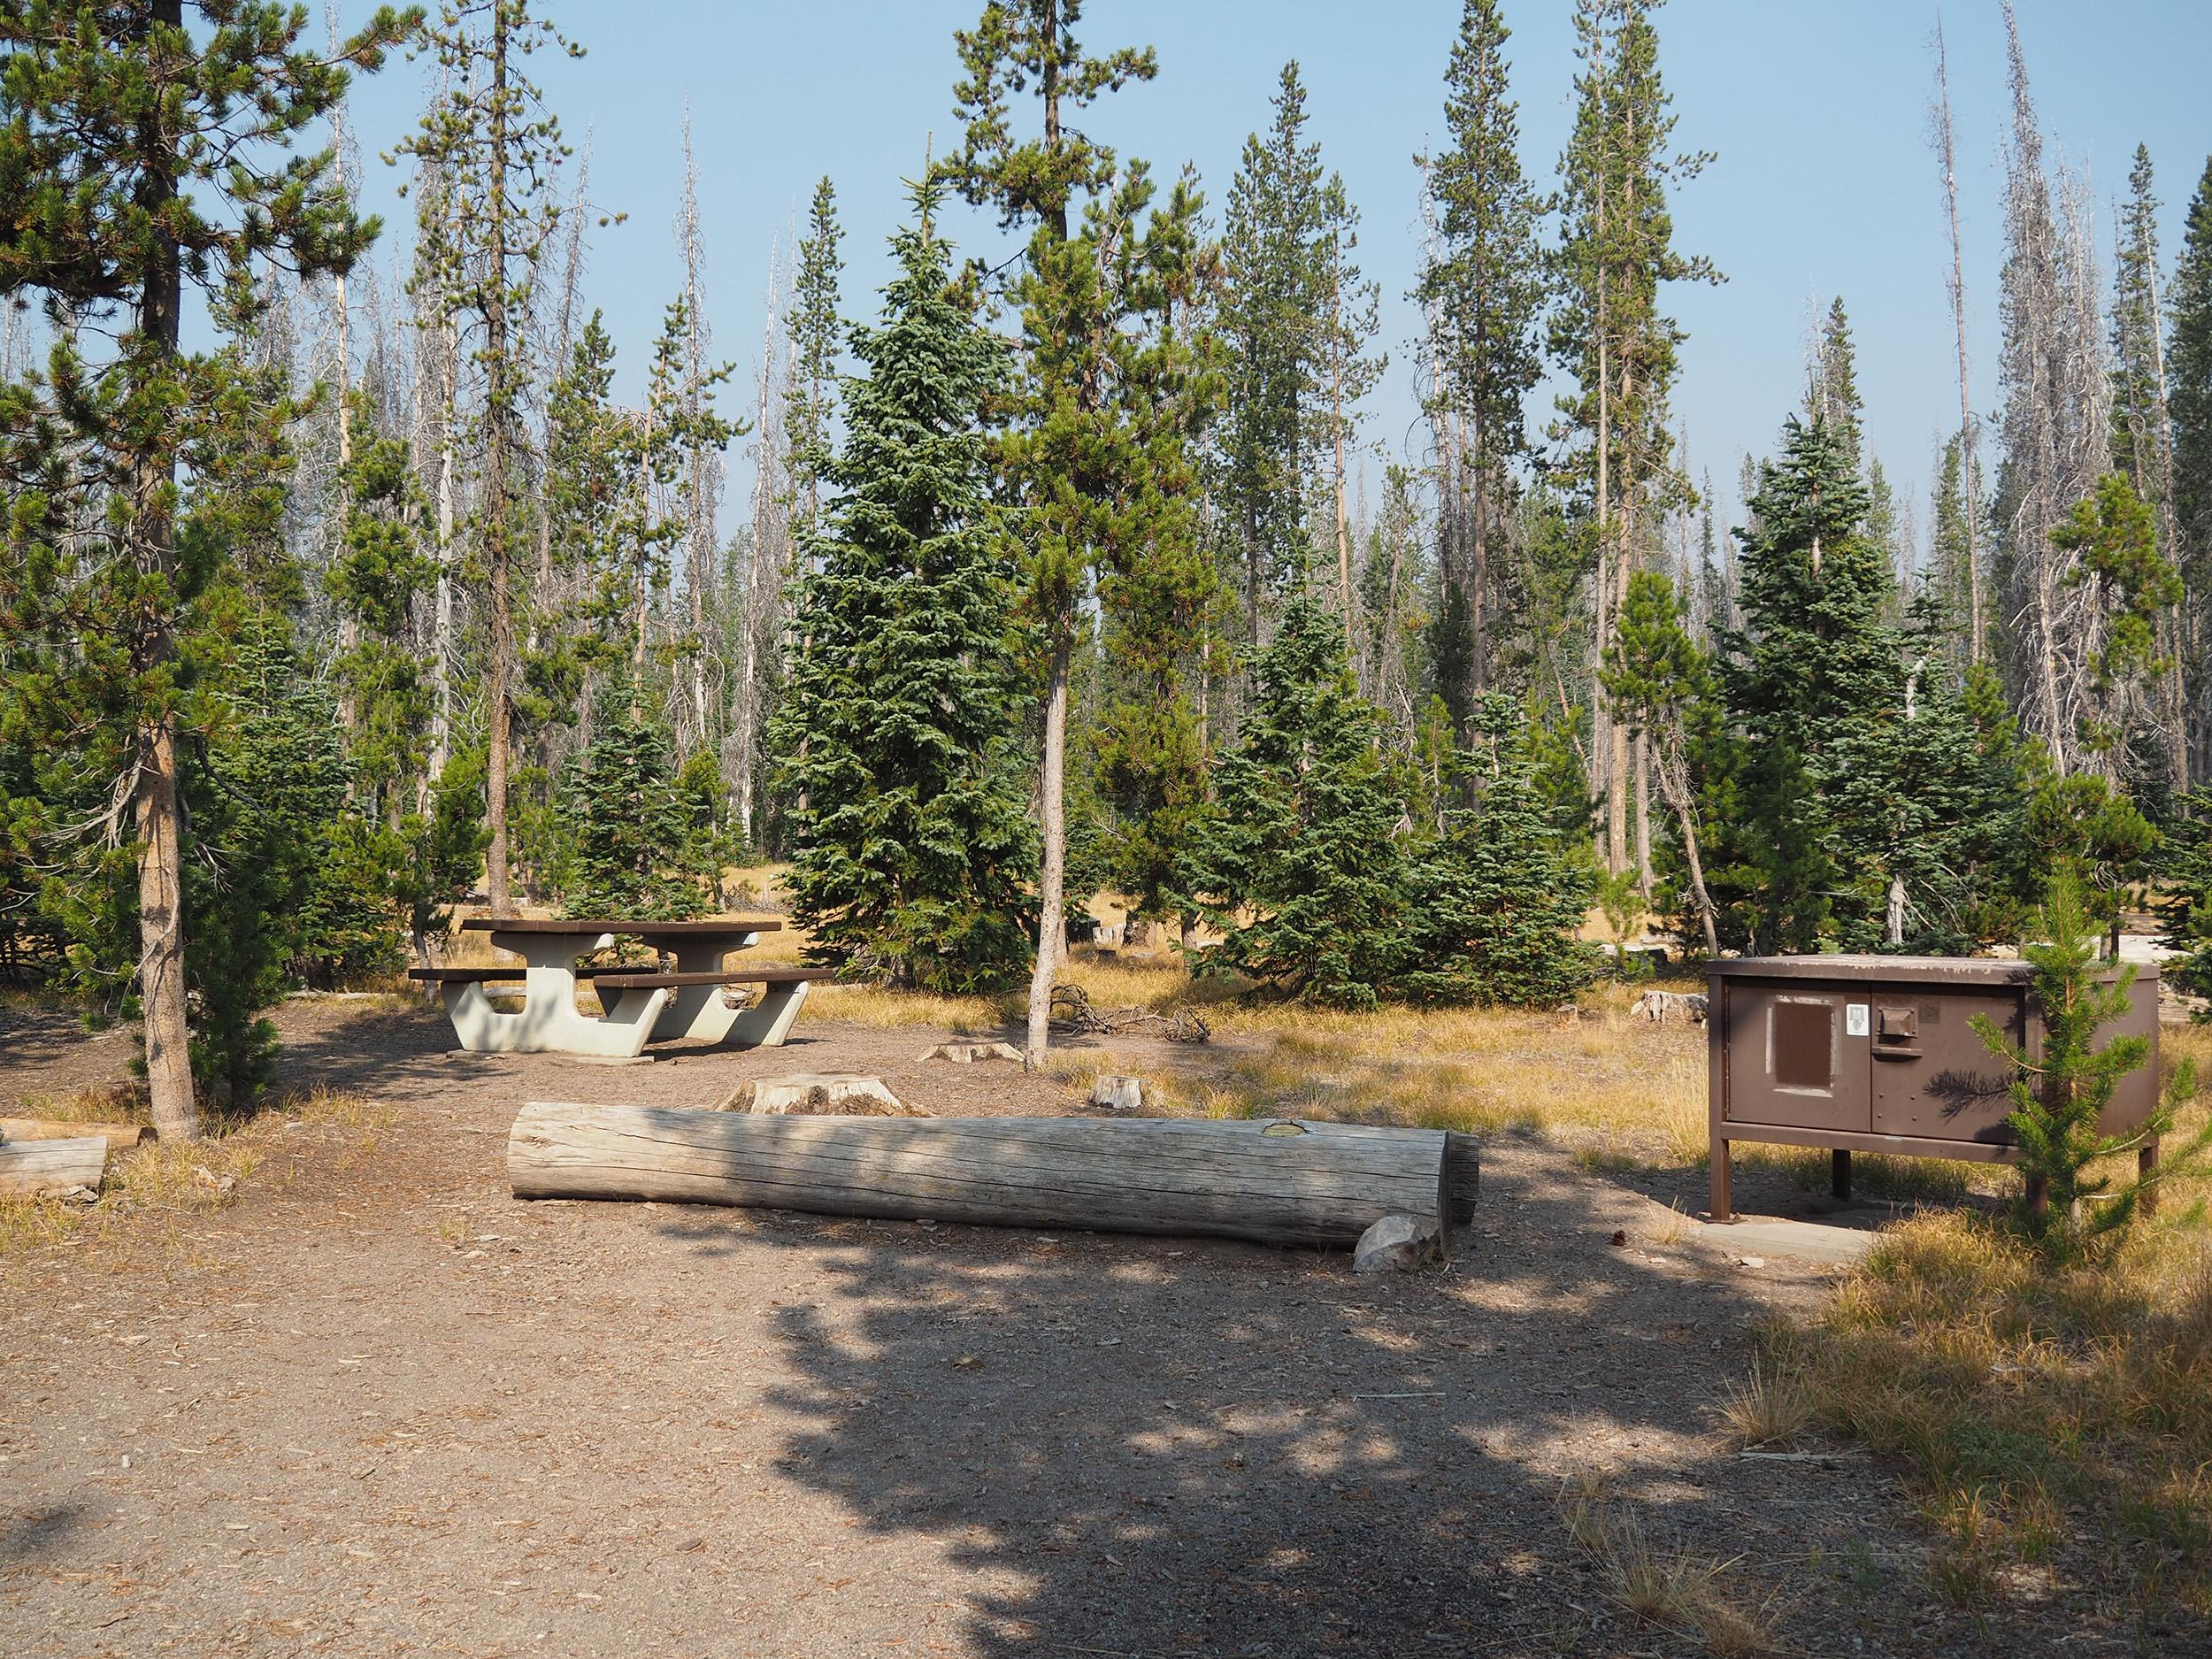 Campsite with picnic table and bear proof storage container